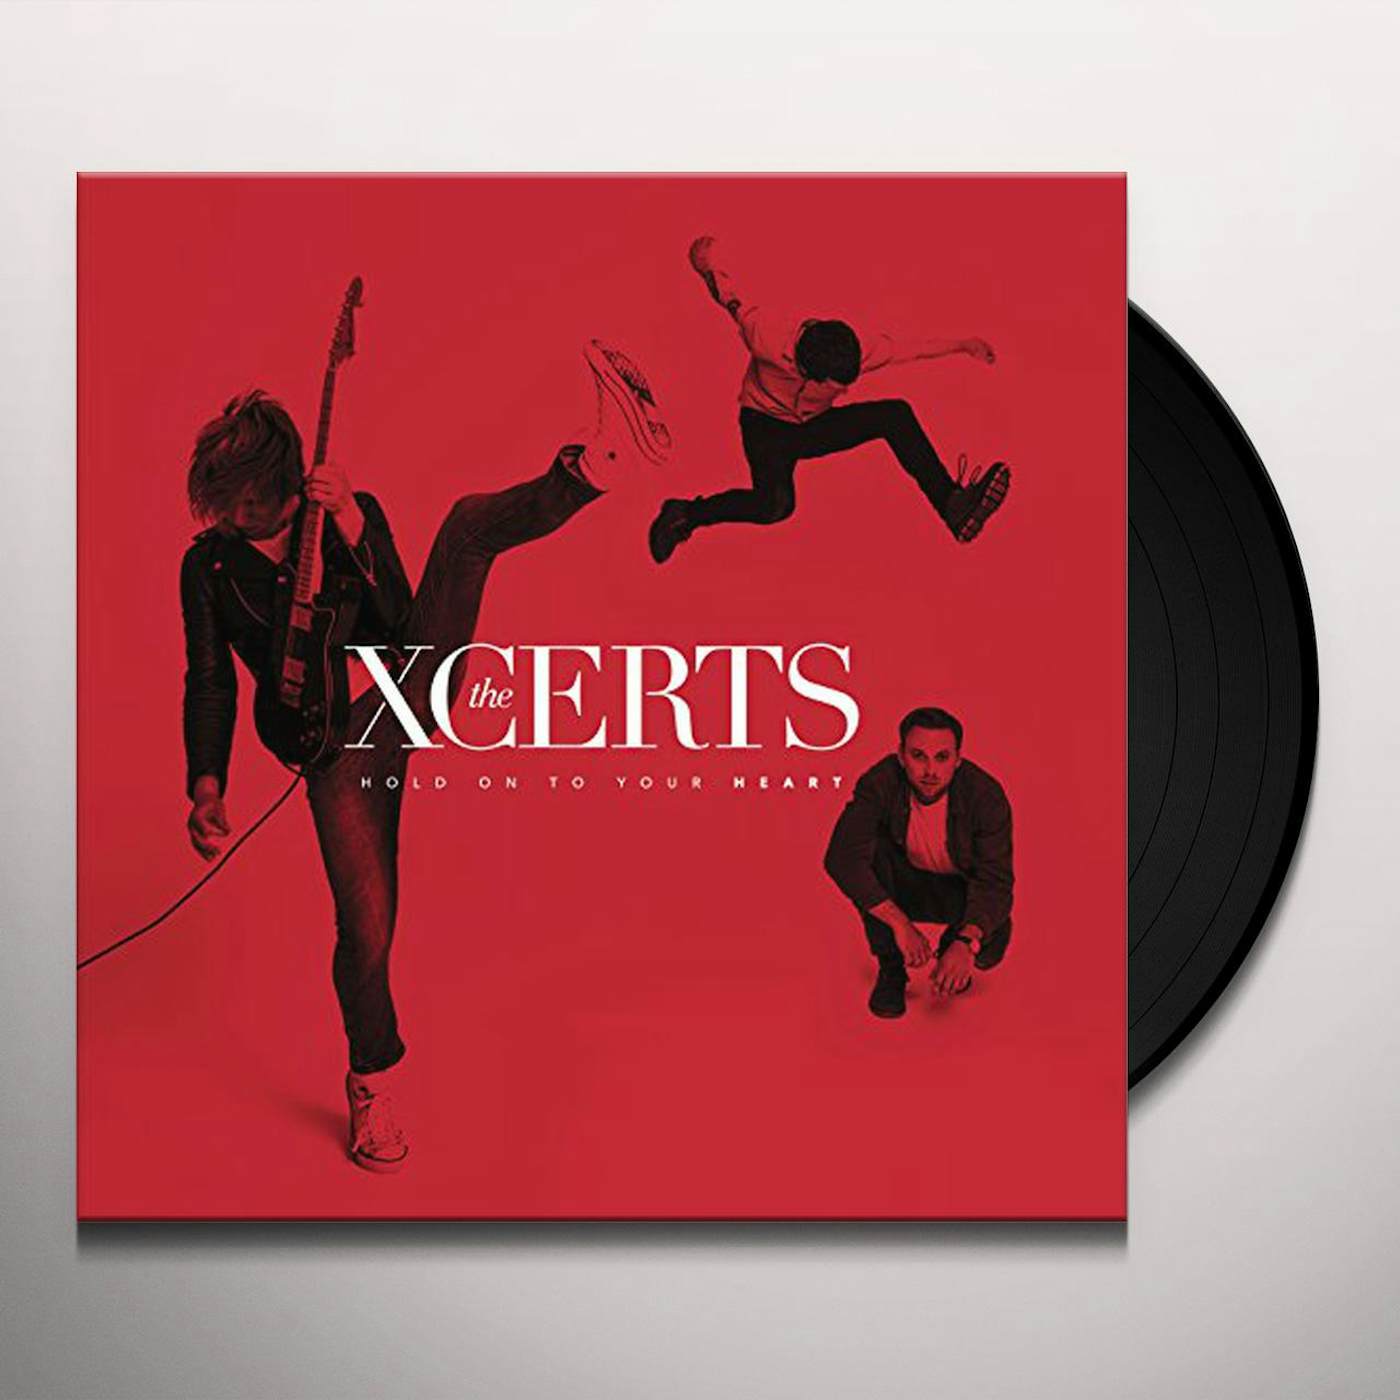 The XCERTS Hold on to Your Heart Vinyl Record